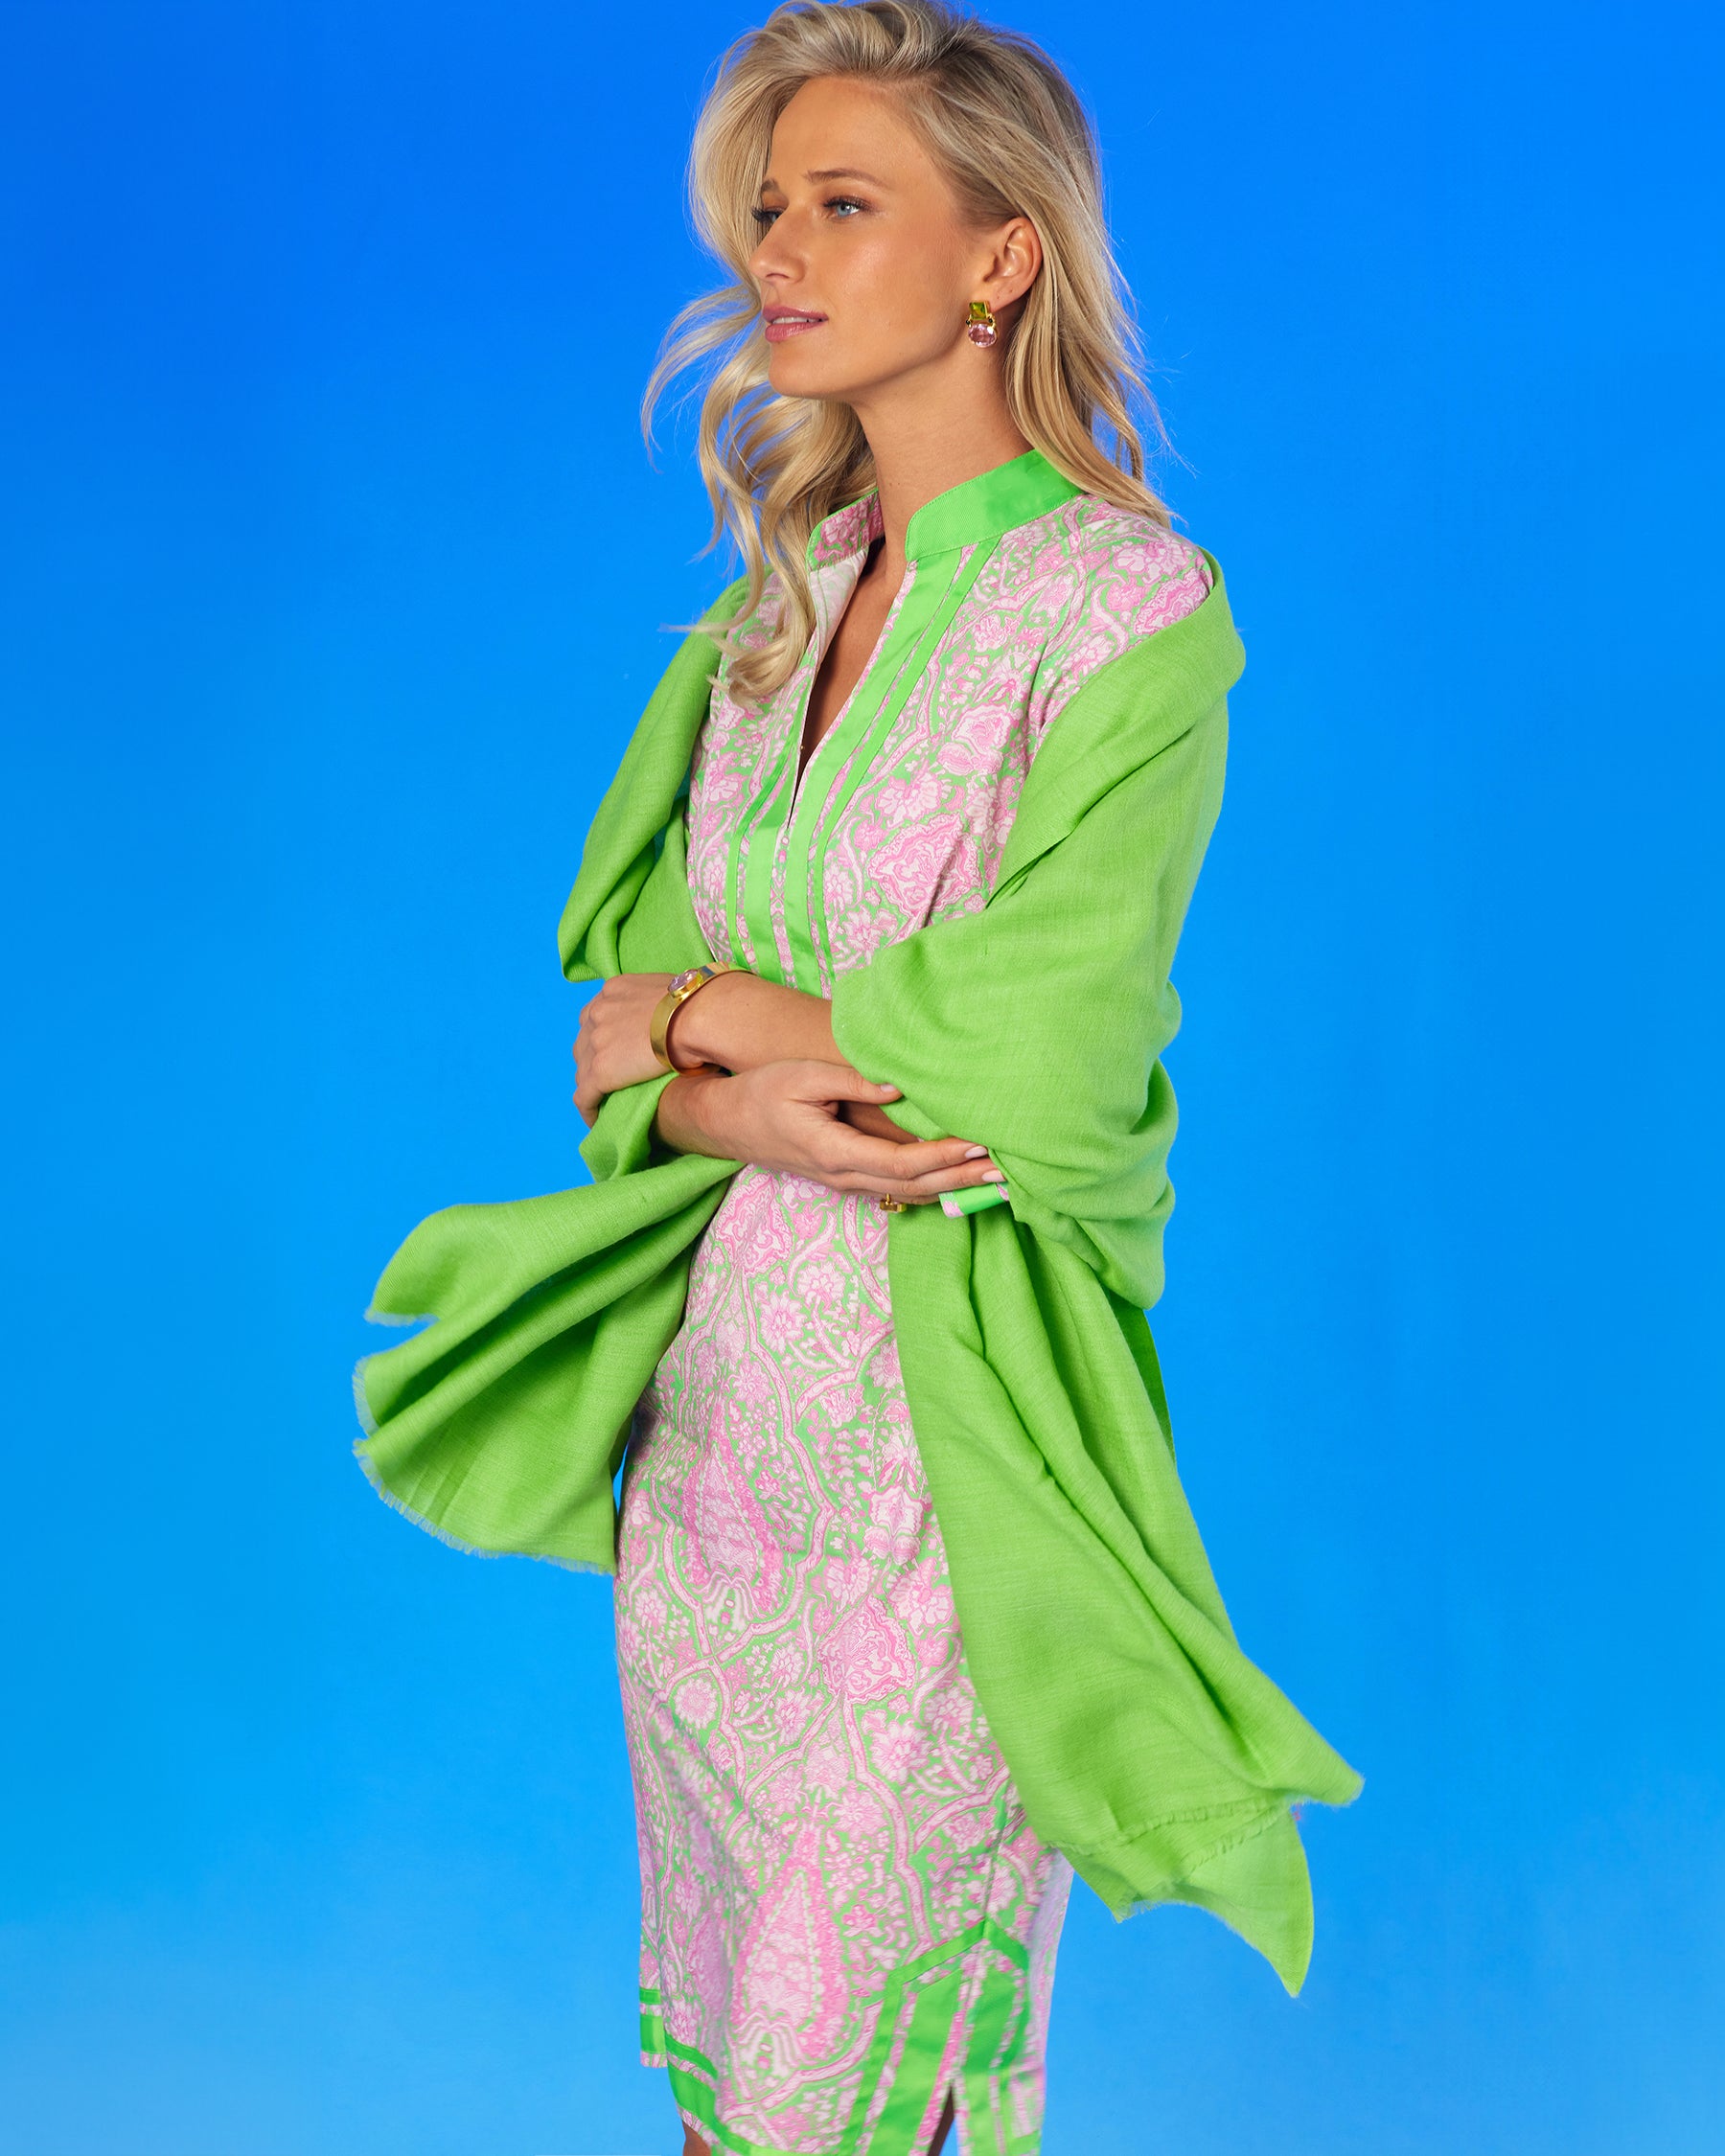 Capri Short Tunic Dress in Pink and Mint Julep Green Paisley with Josephine Pashmina Shawl in Lime closeup view